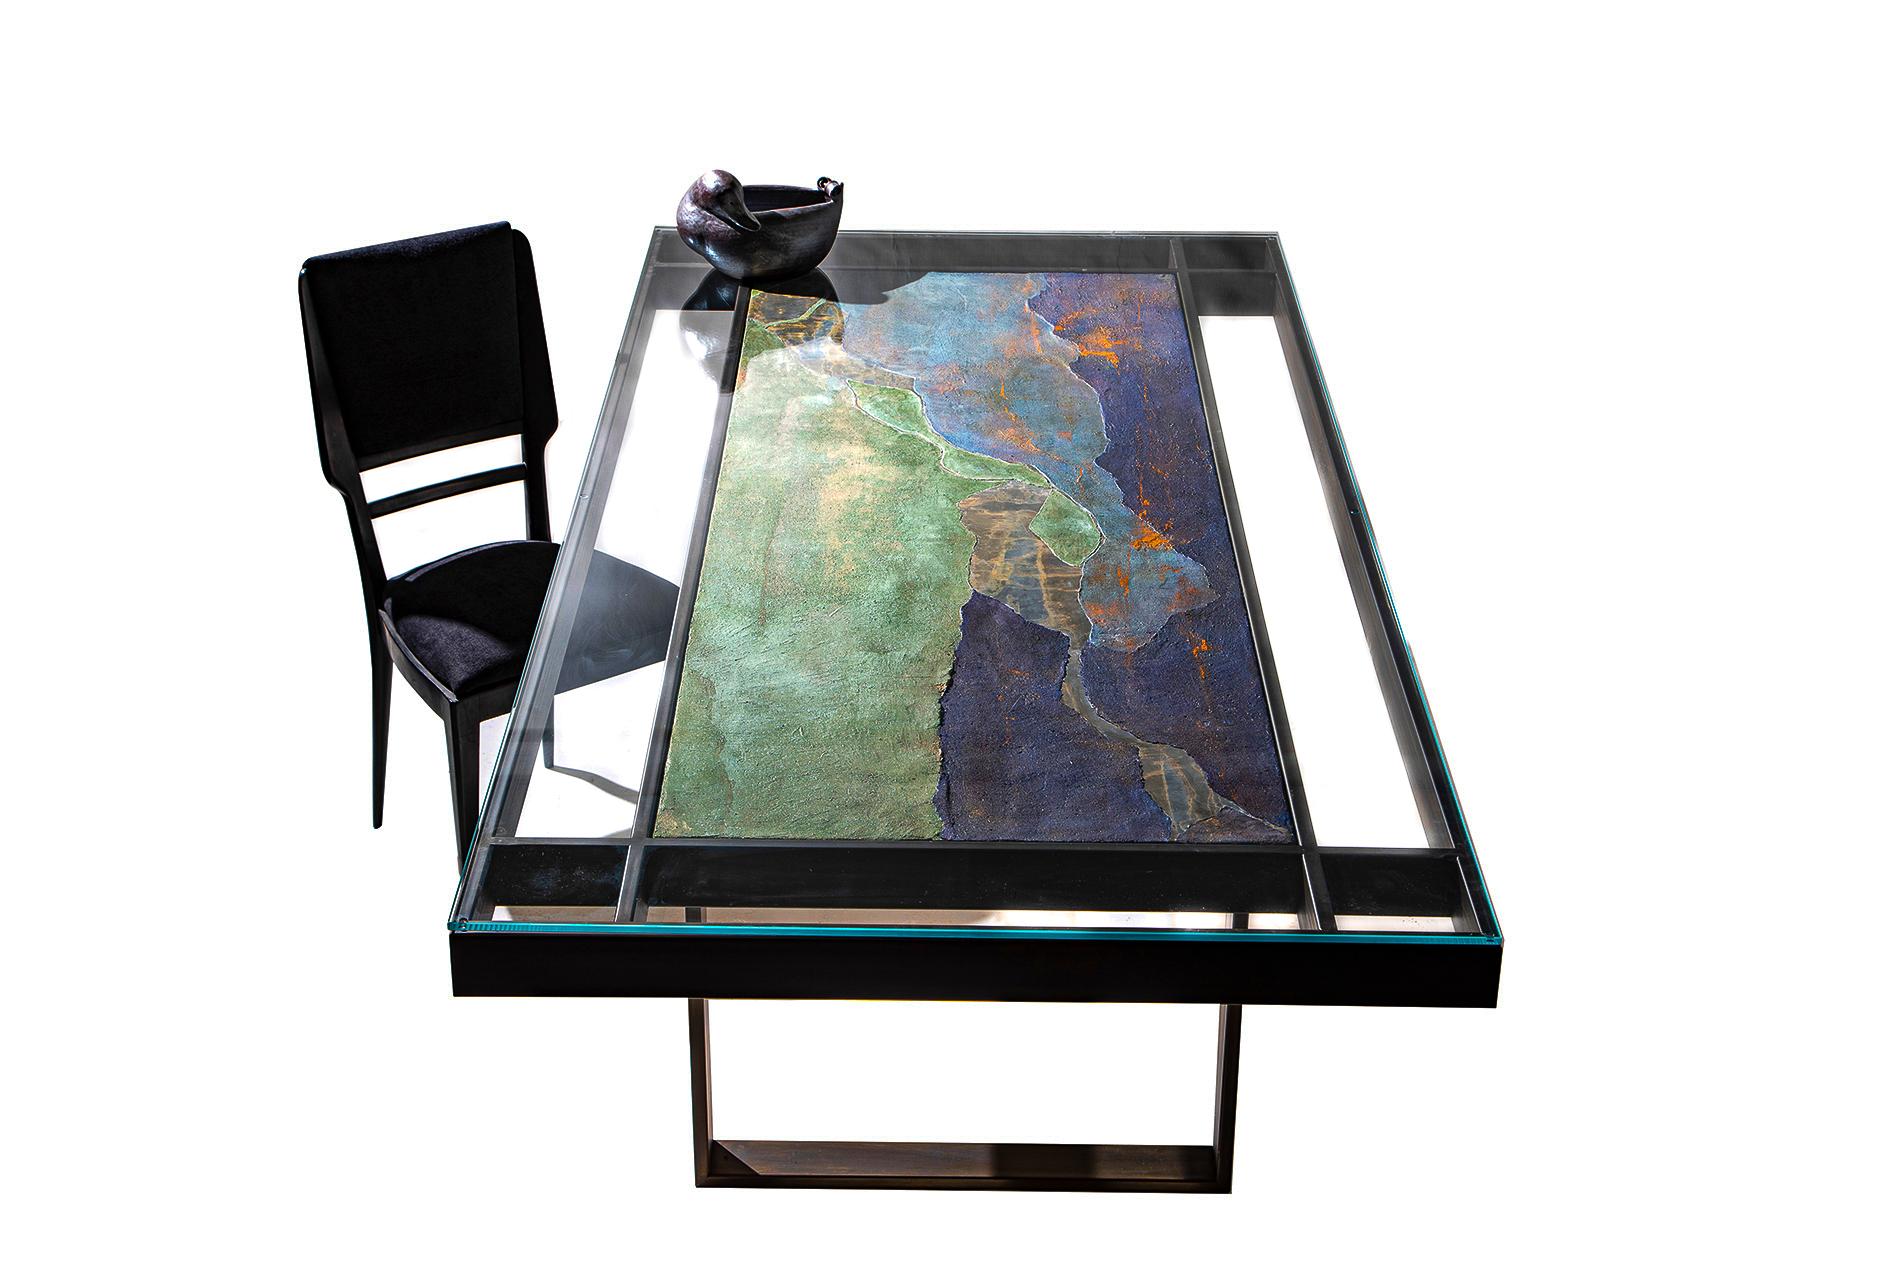 “THAT DAY BY THE LAKE” is a one-of-a-kind table designed and manufactured by KalaRara. Recalling days spent watching the light dapple across an aquatic landscape, the tabletop was created on canvas with composite of silica, sand, natural pigments